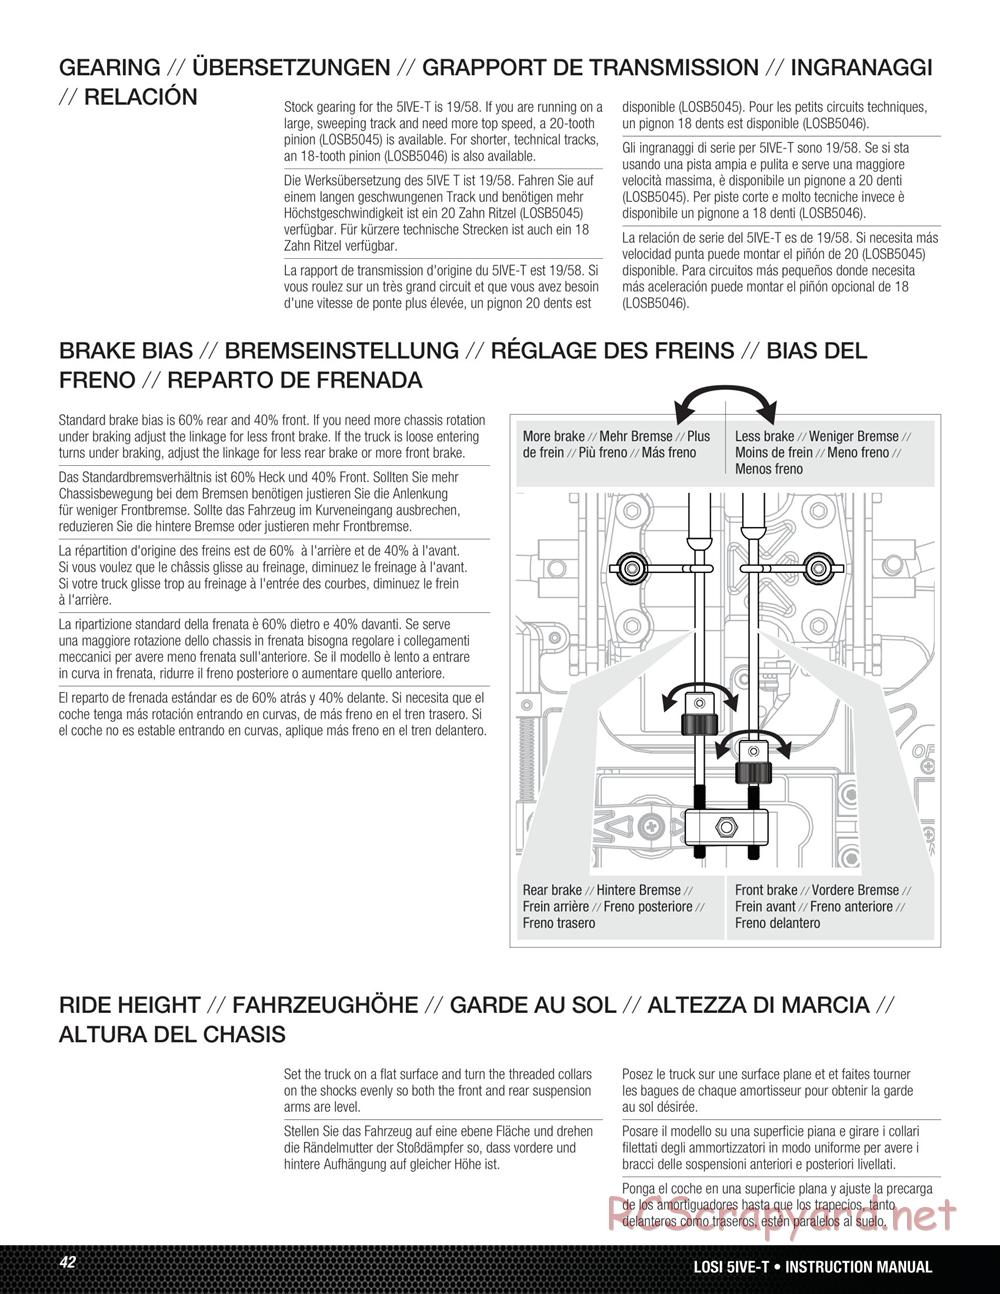 Team Losi - 5ive-T - Manual - Page 42